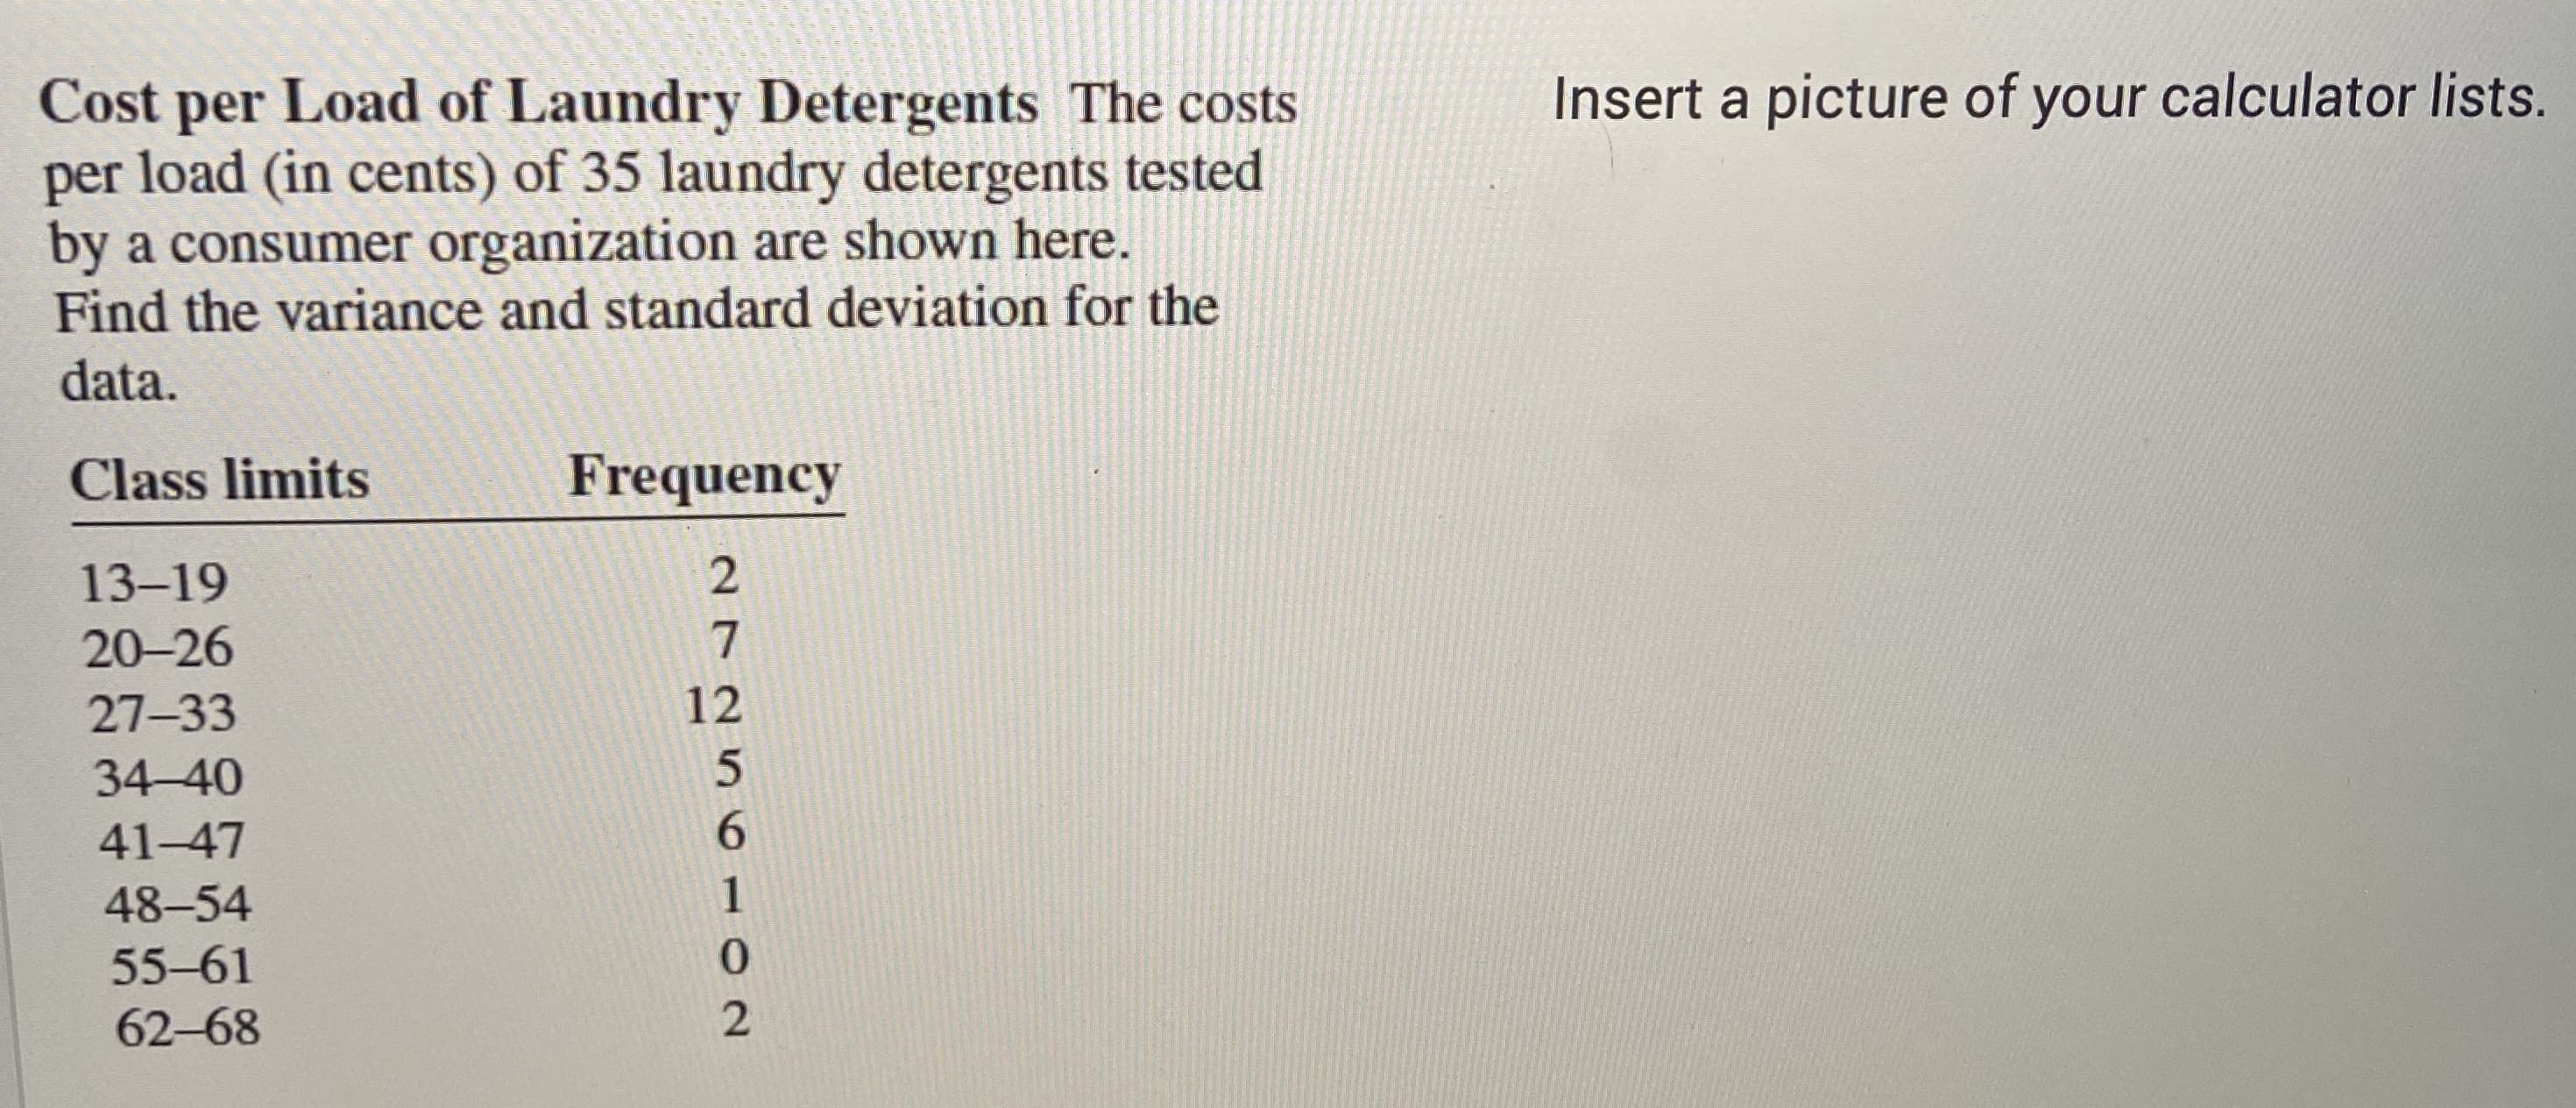 Cost per Load of Laundry Detergents The costs
per load (in cents) of 35 laundry detergents tested
by a consumer organization are shown here.
Find the variance and standard deviation for the
data.
Class limits
Frequency
13-19
20-26
7
27-33
12
34-40
41-47
6.
48-54
1
55-61
62-68
